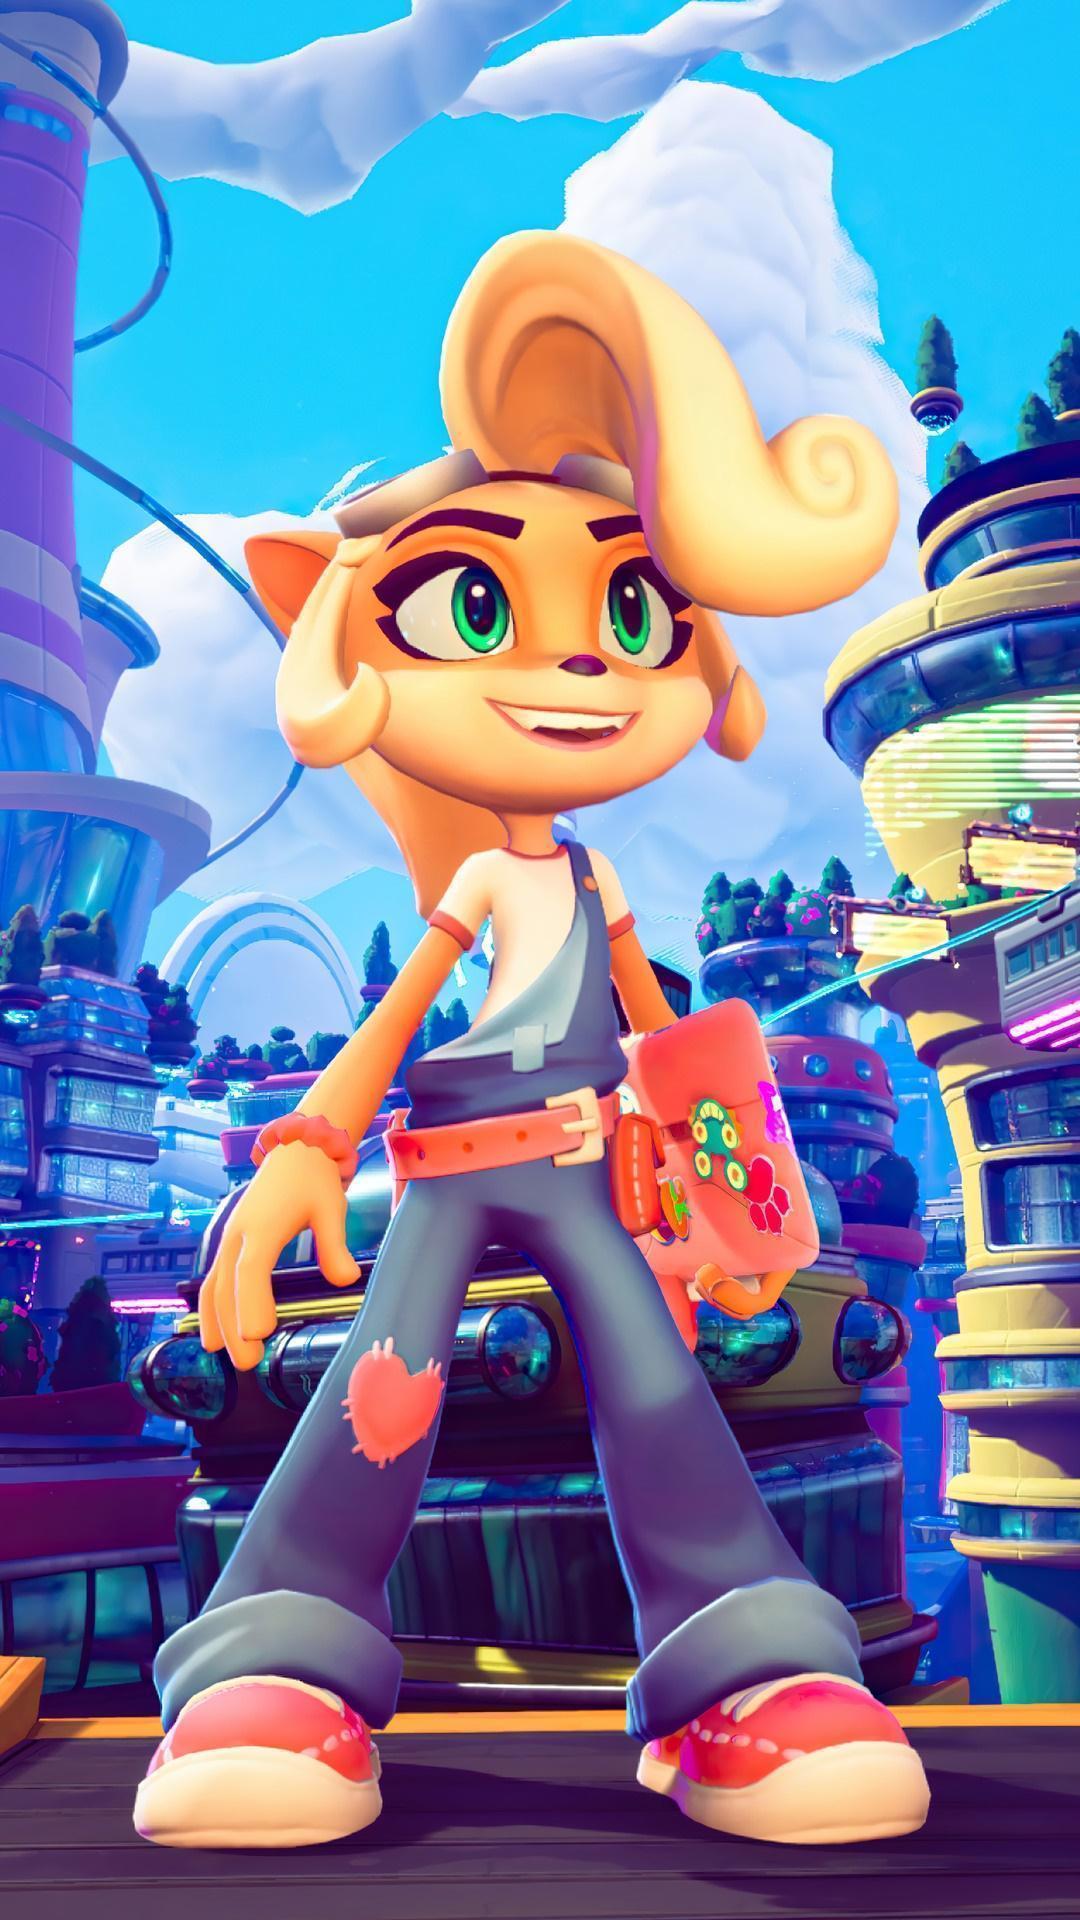 HD wallpaper, Video Game, Coco Bandicoot, Crash Bandicoot 4 Its About Time